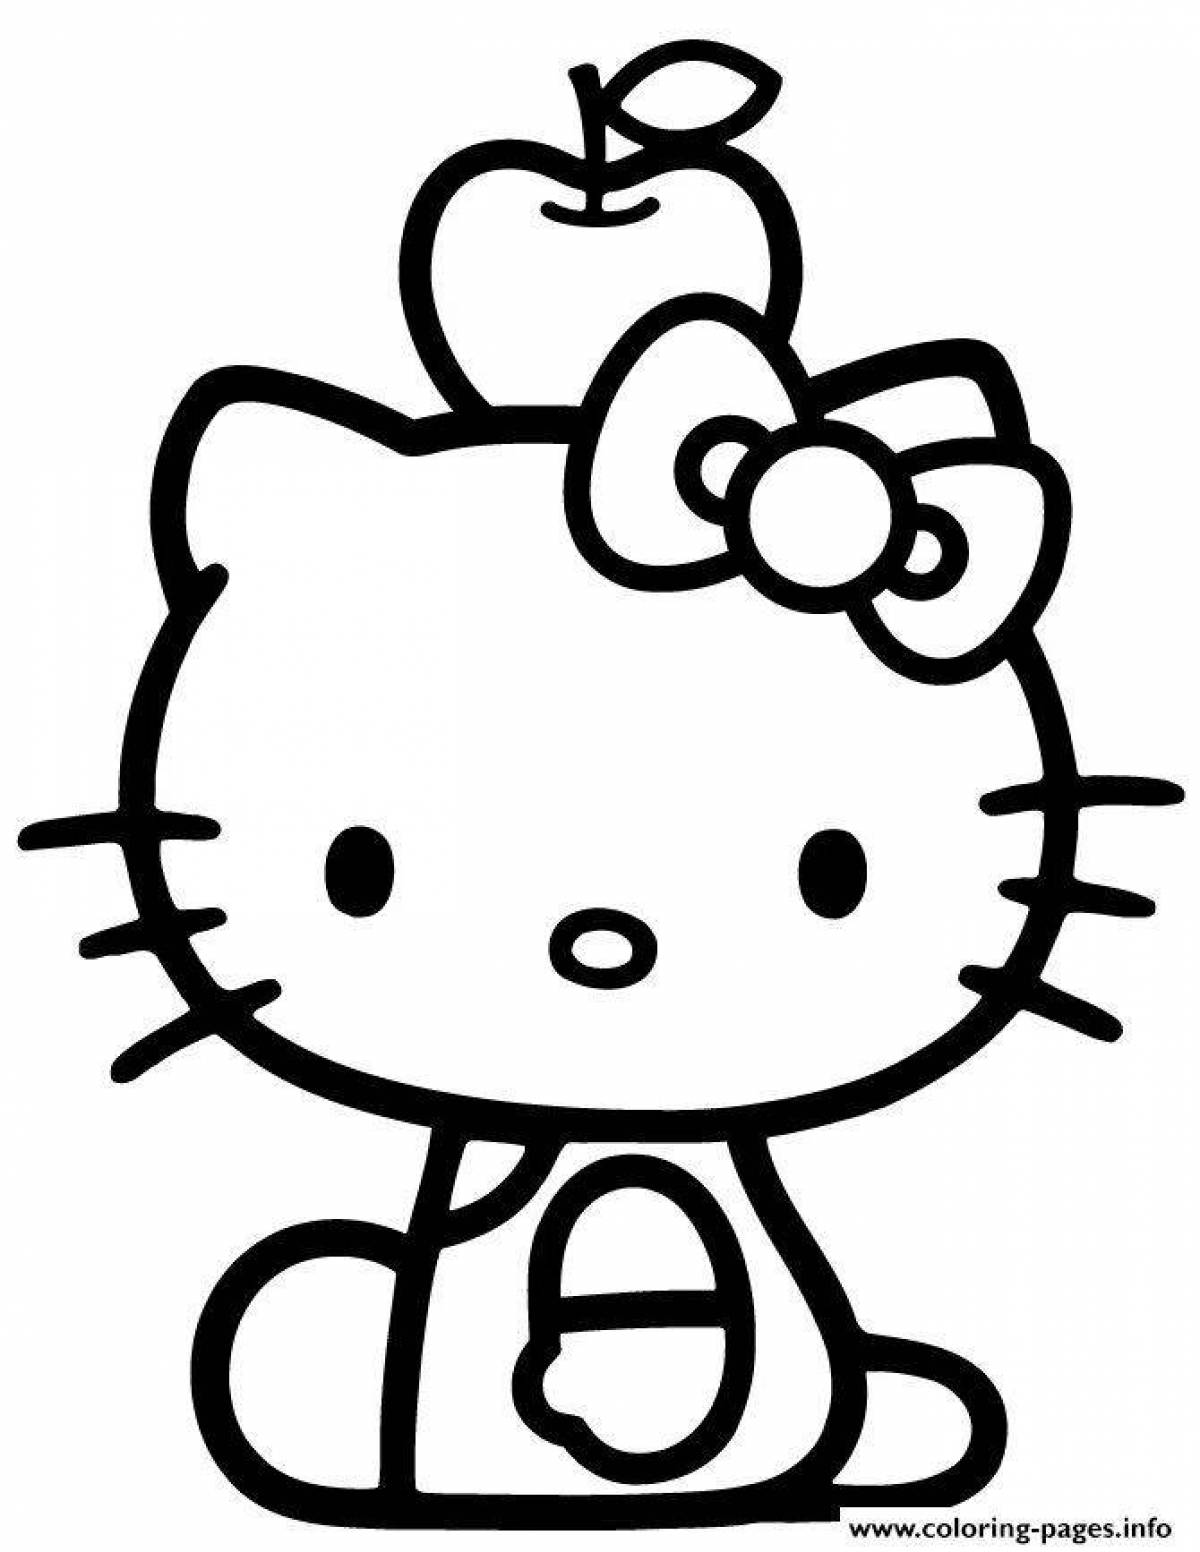 Exciting hello kitty sticker coloring page